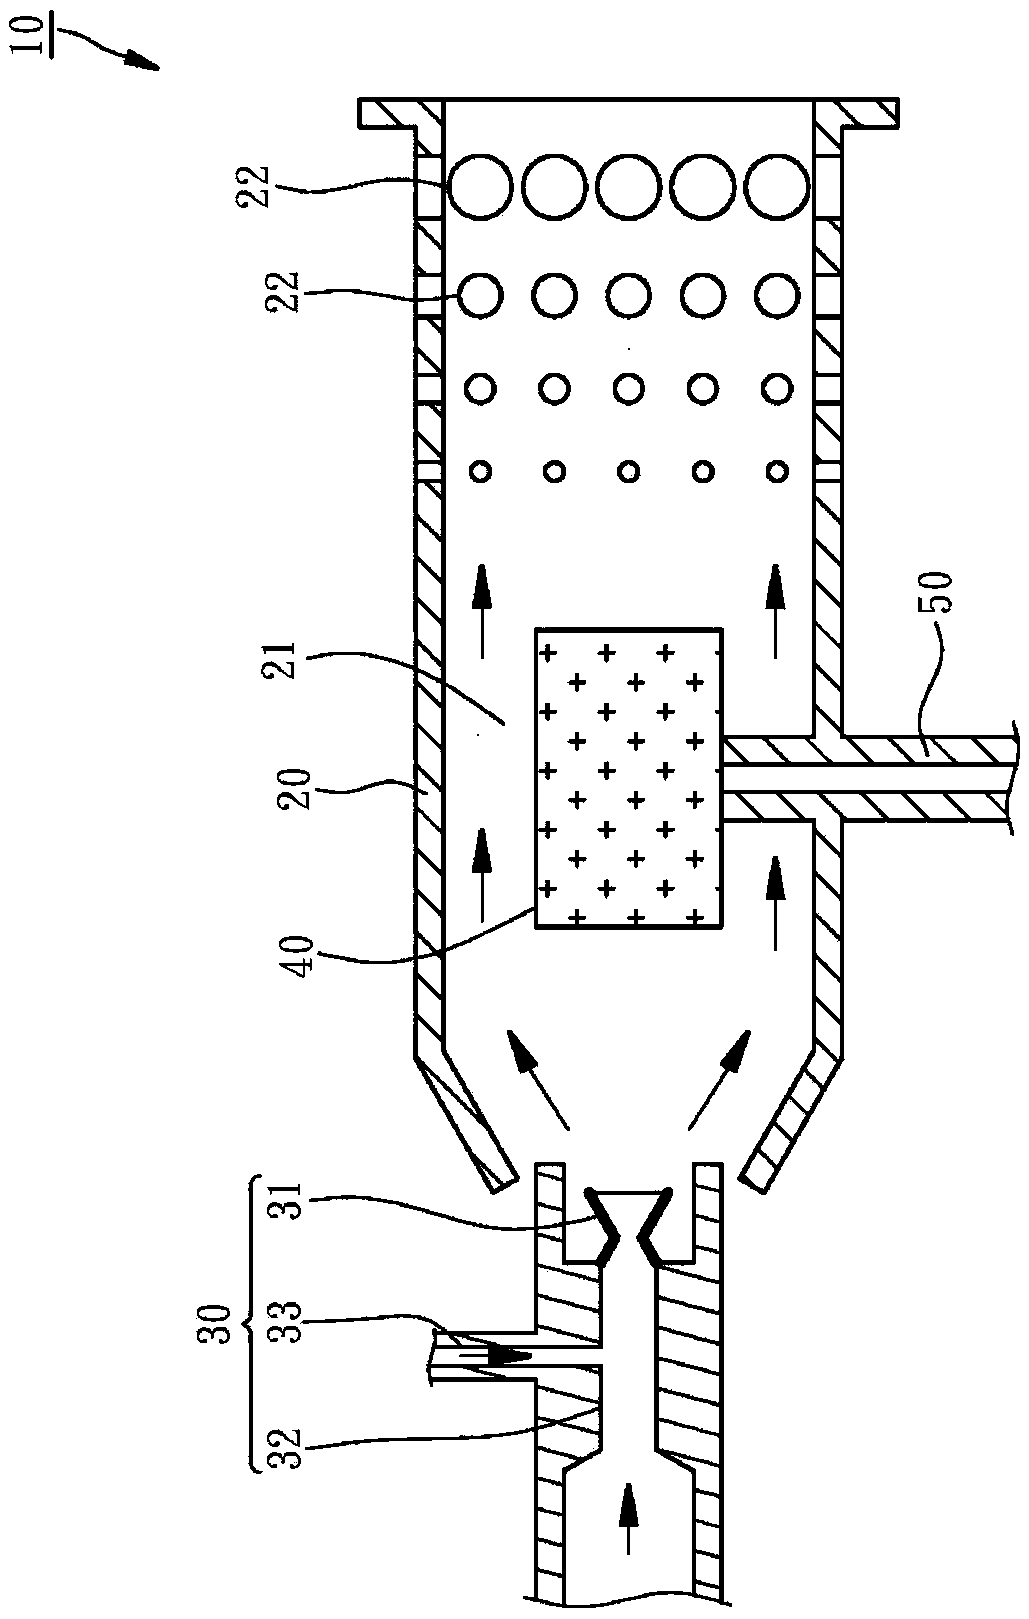 Combustion device with controllable output heat source temperature